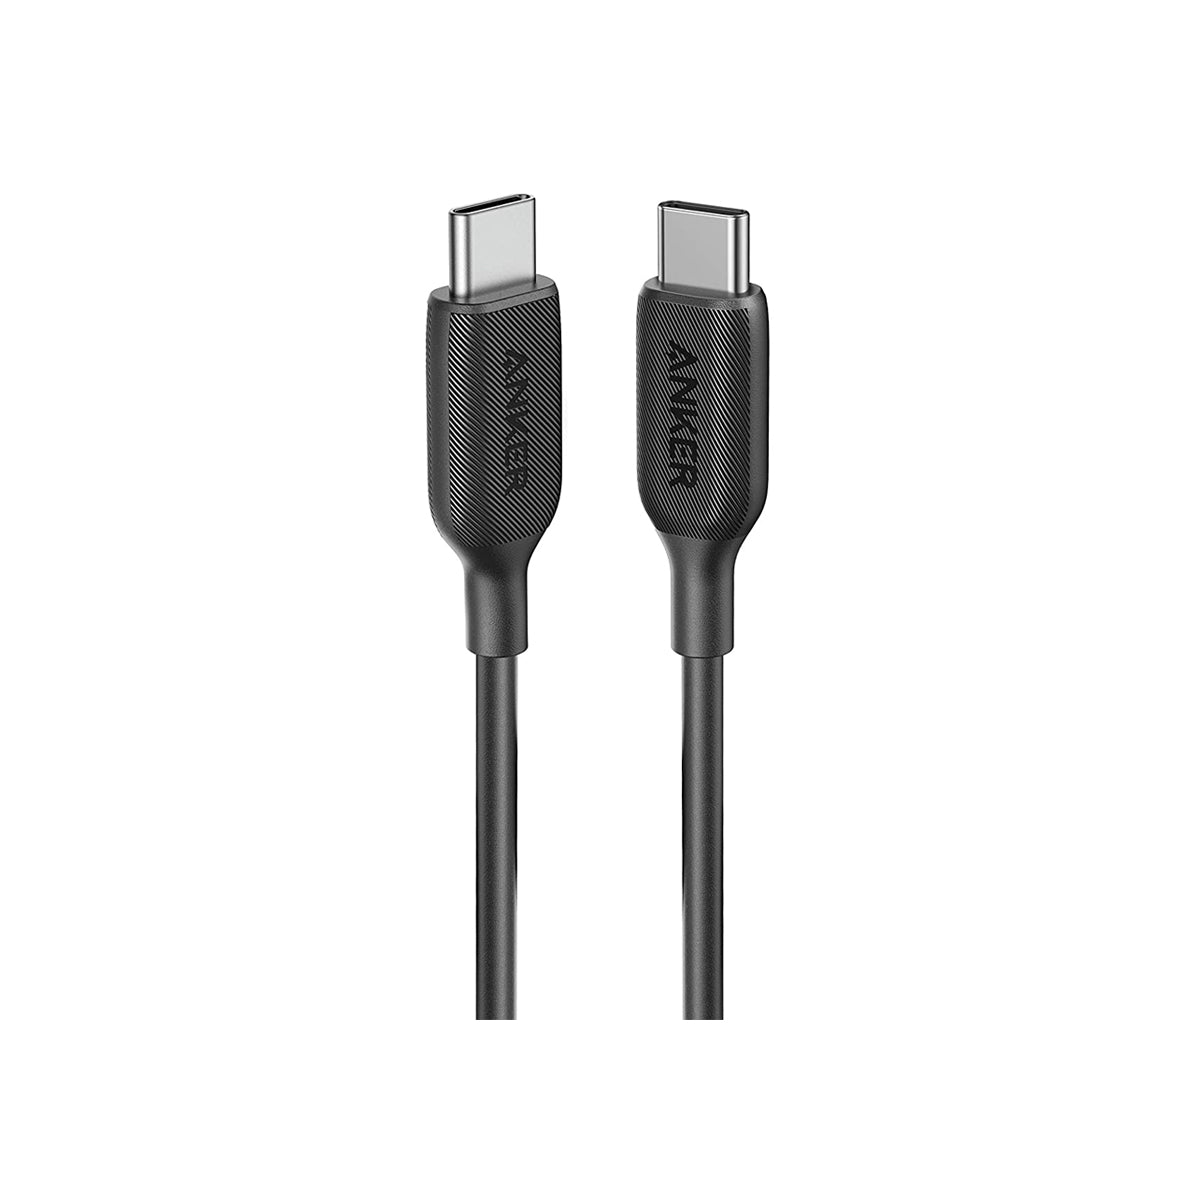 Anker PowerLine III USB-C to USB-C 2.0 Cable review 